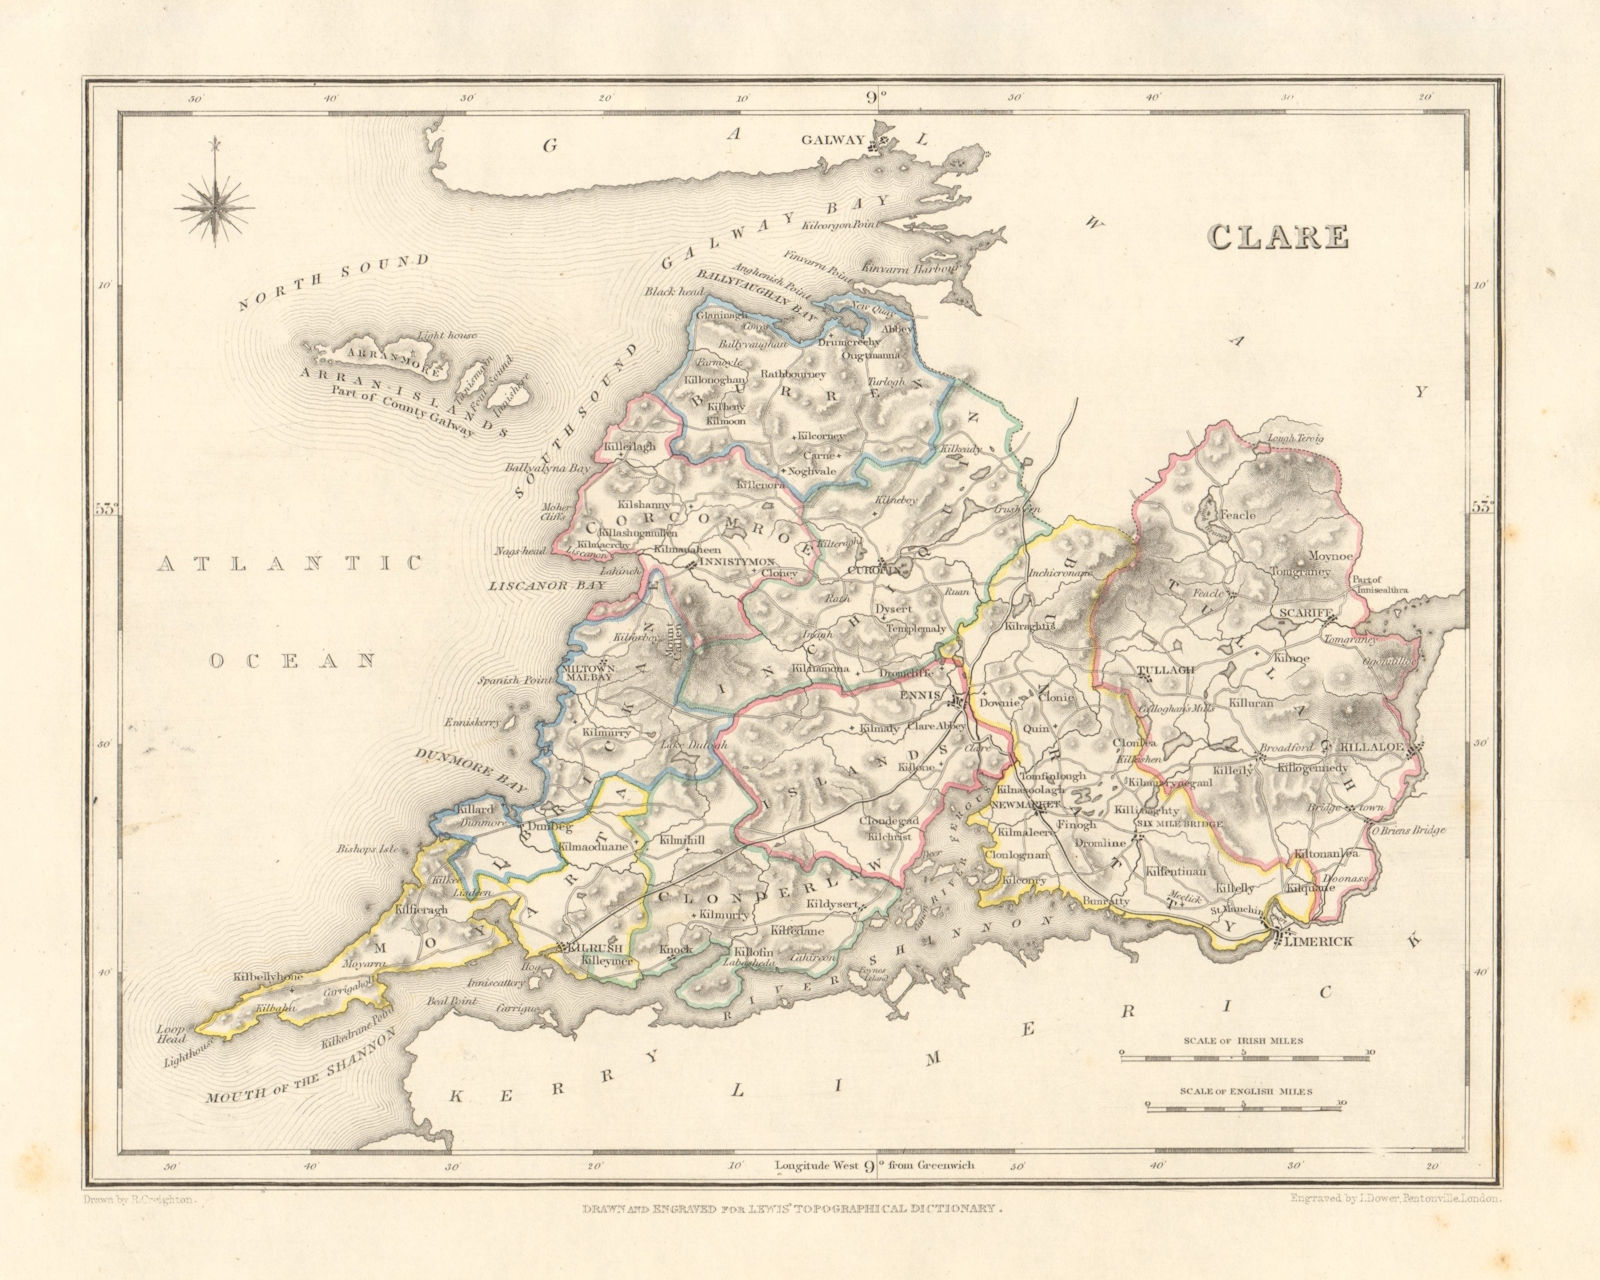 COUNTY CLARE antique map for LEWIS by DOWER & CREIGHTON. Ireland 1846 old